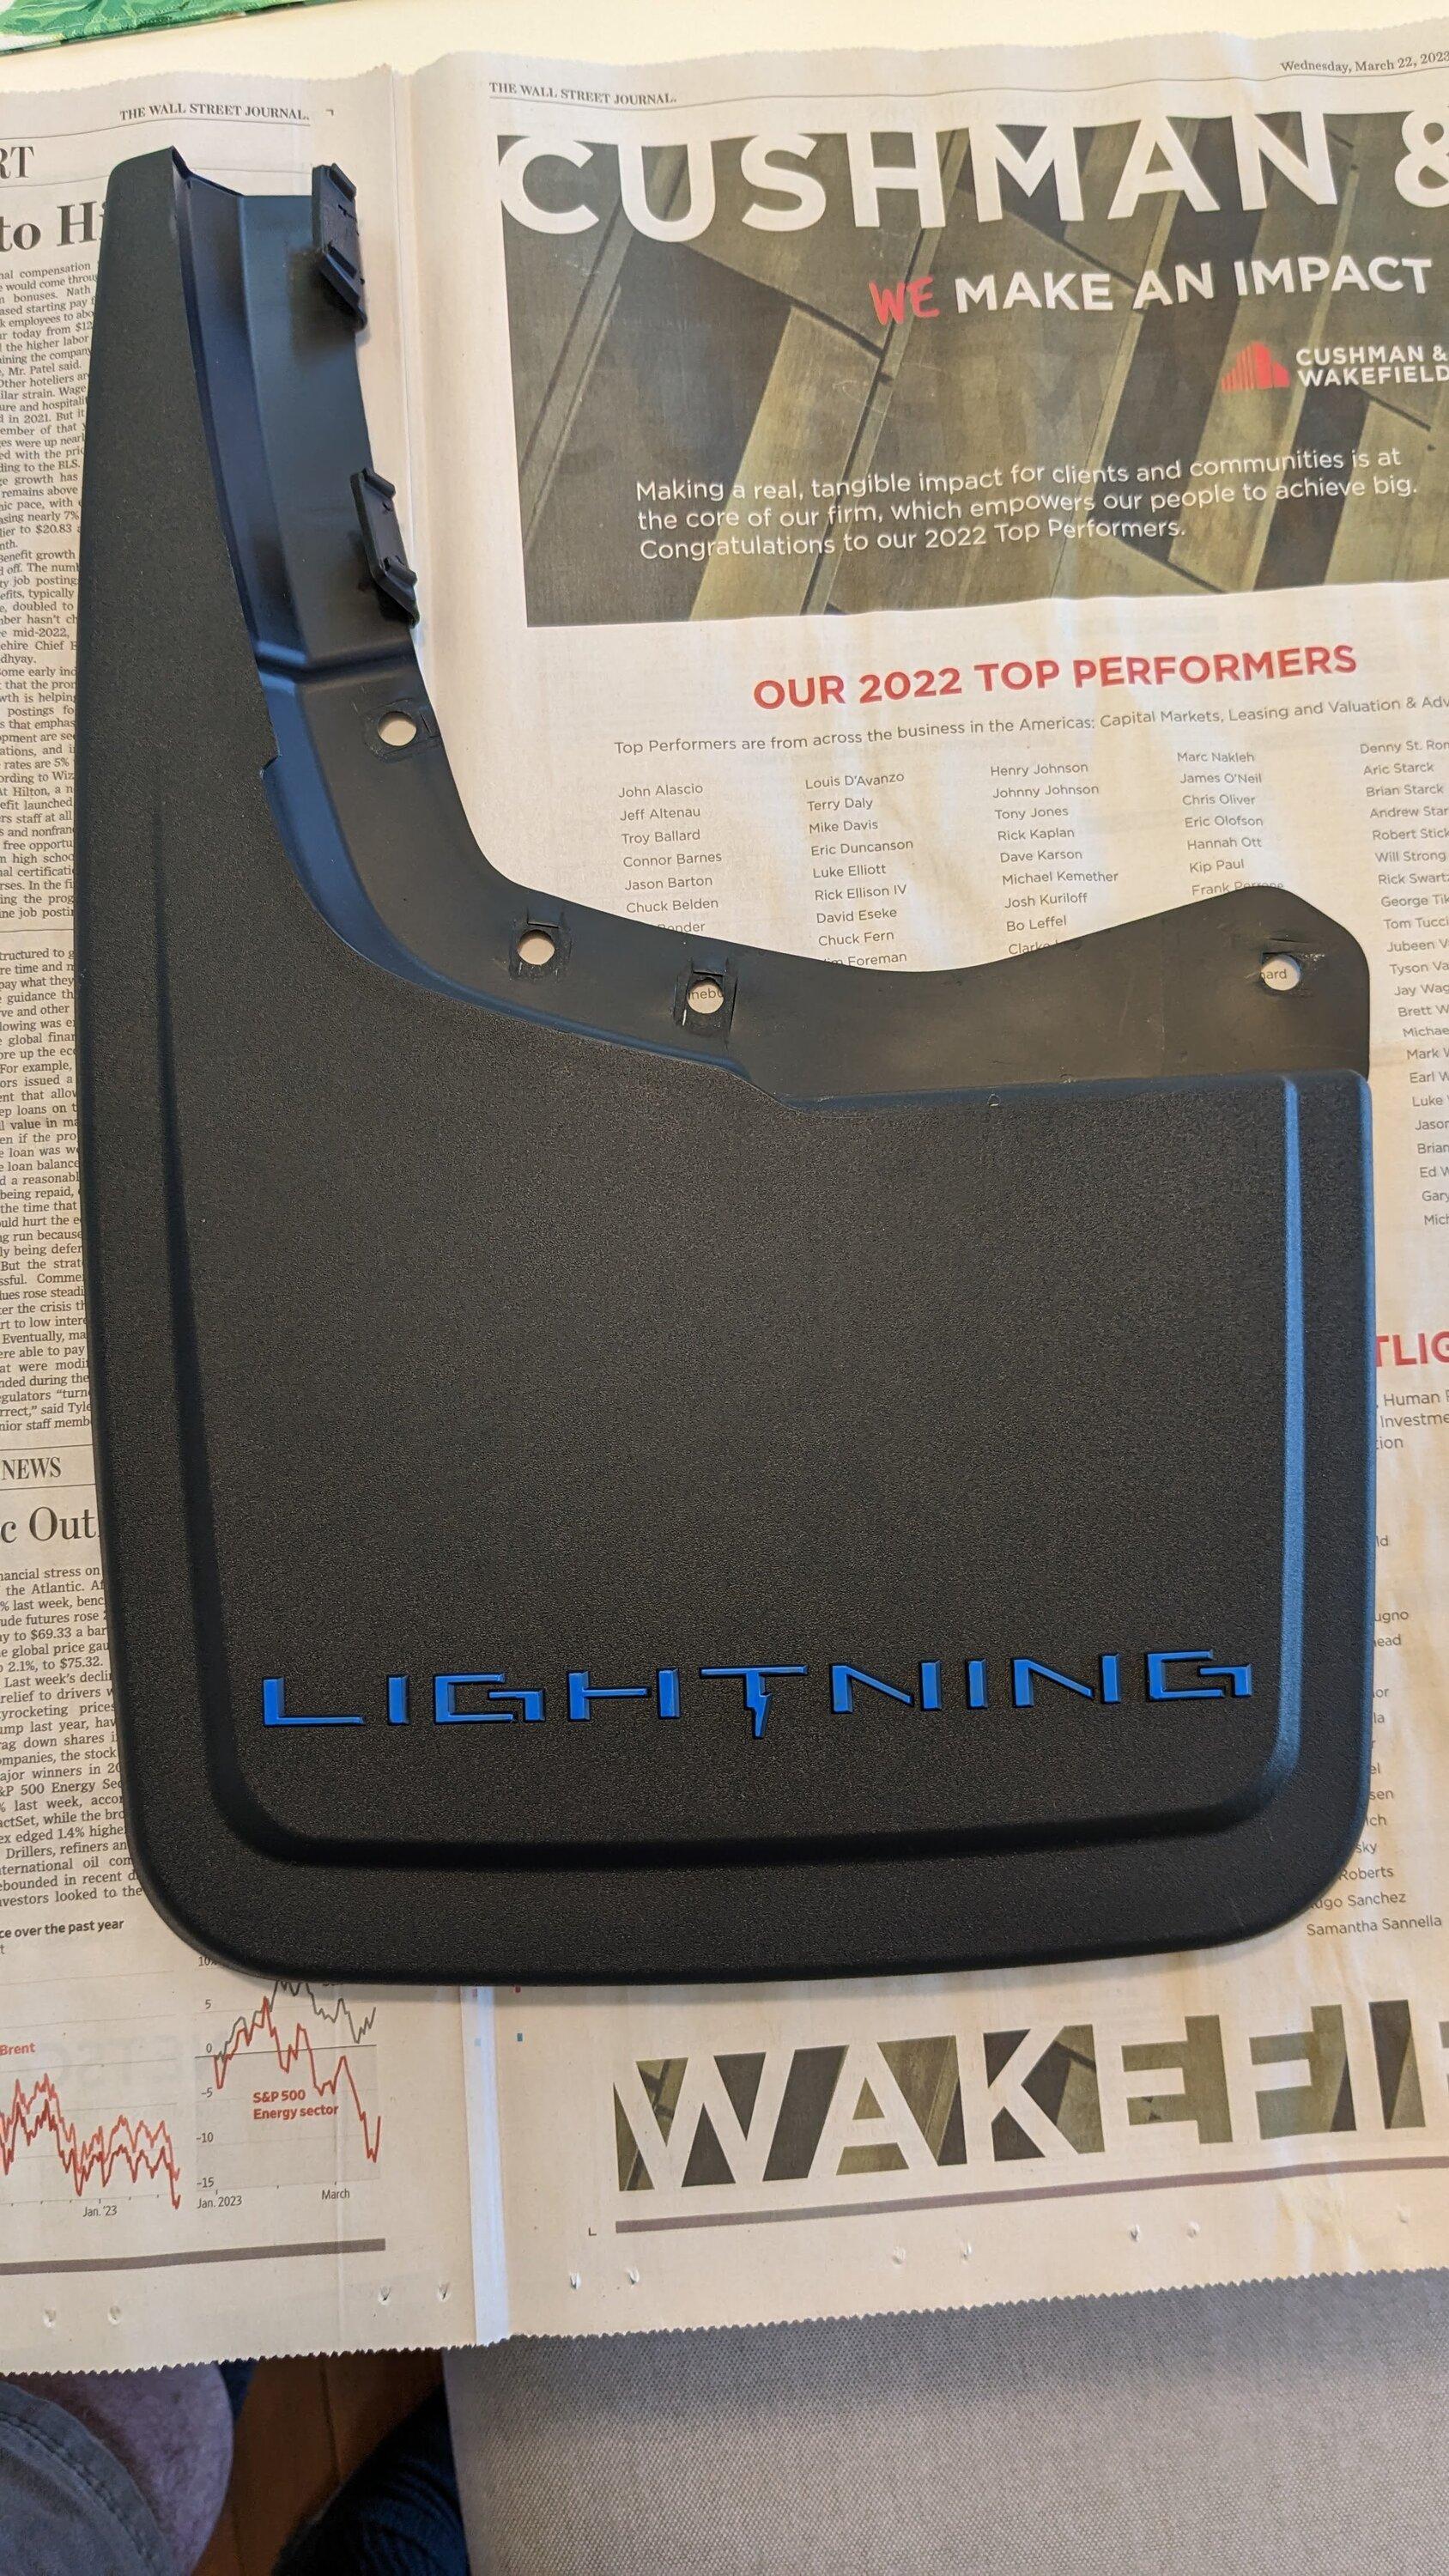 Ford F-150 Lightning 【BestEvMod】Let’s do a giveaway raffle on our Mud Flap! Mudflaps after